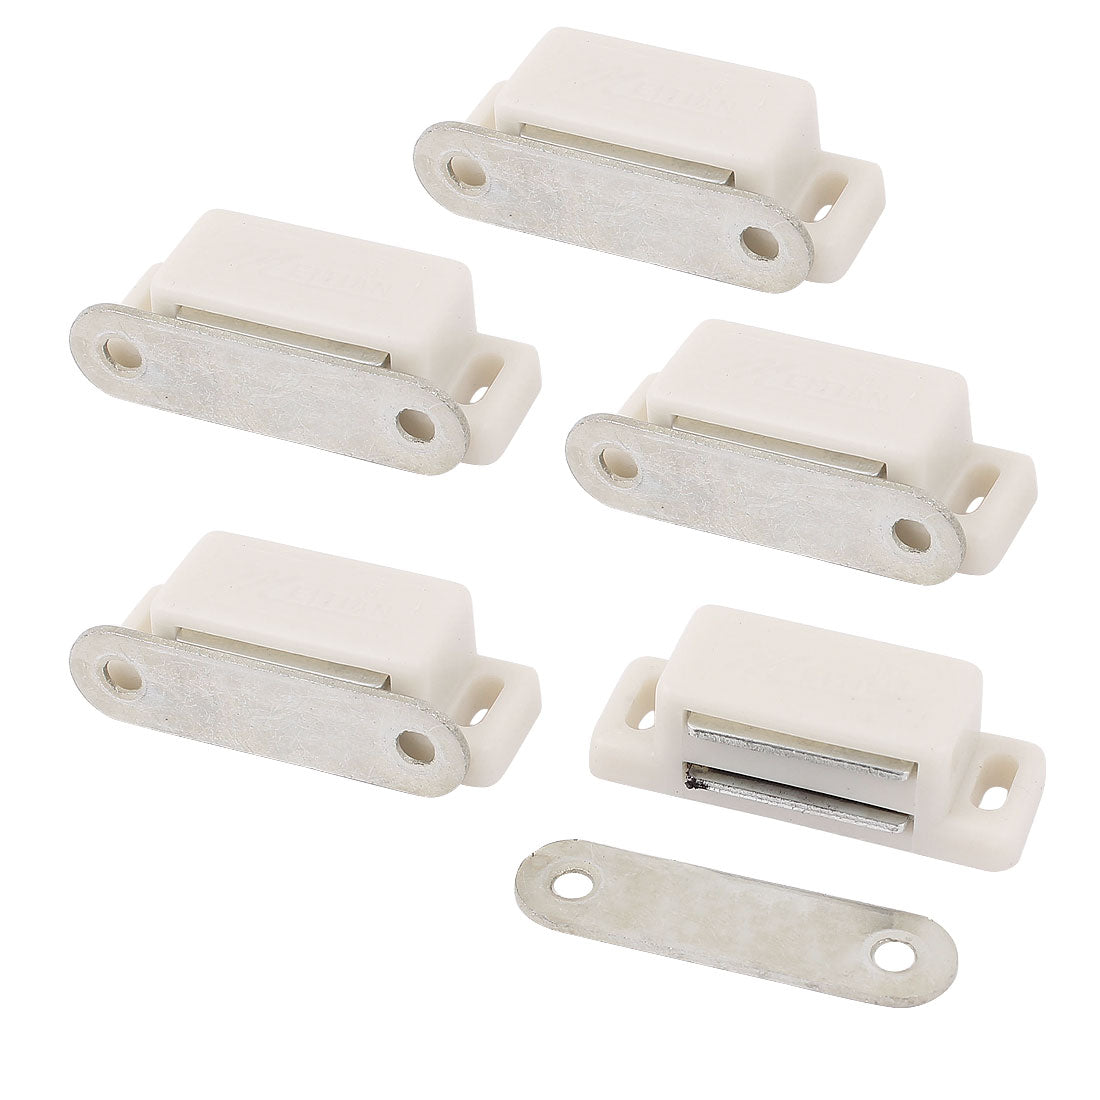 uxcell Uxcell Home Hardware Closet Cabinet Door Stopper Magnetic Catch Stop Self-Aligning Magnet Latch Lock White 5Pcs